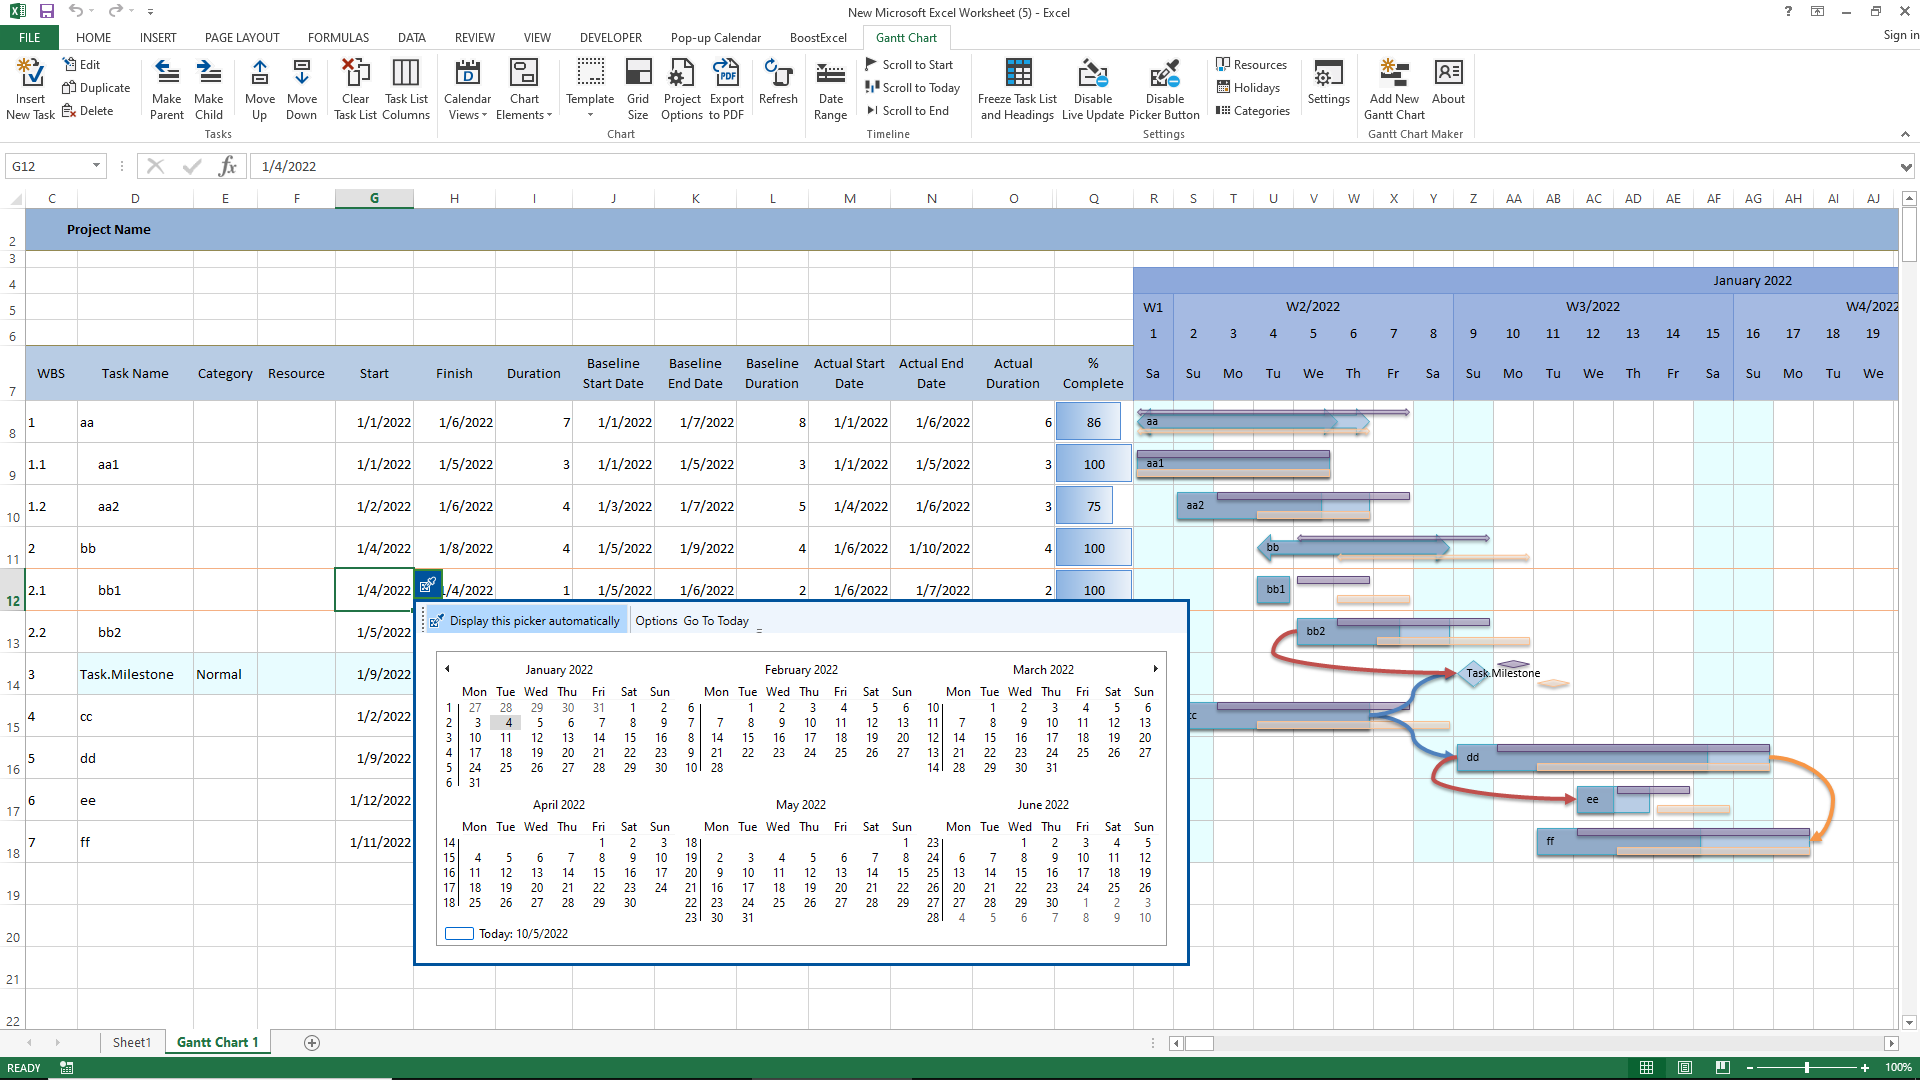 The main Excel window